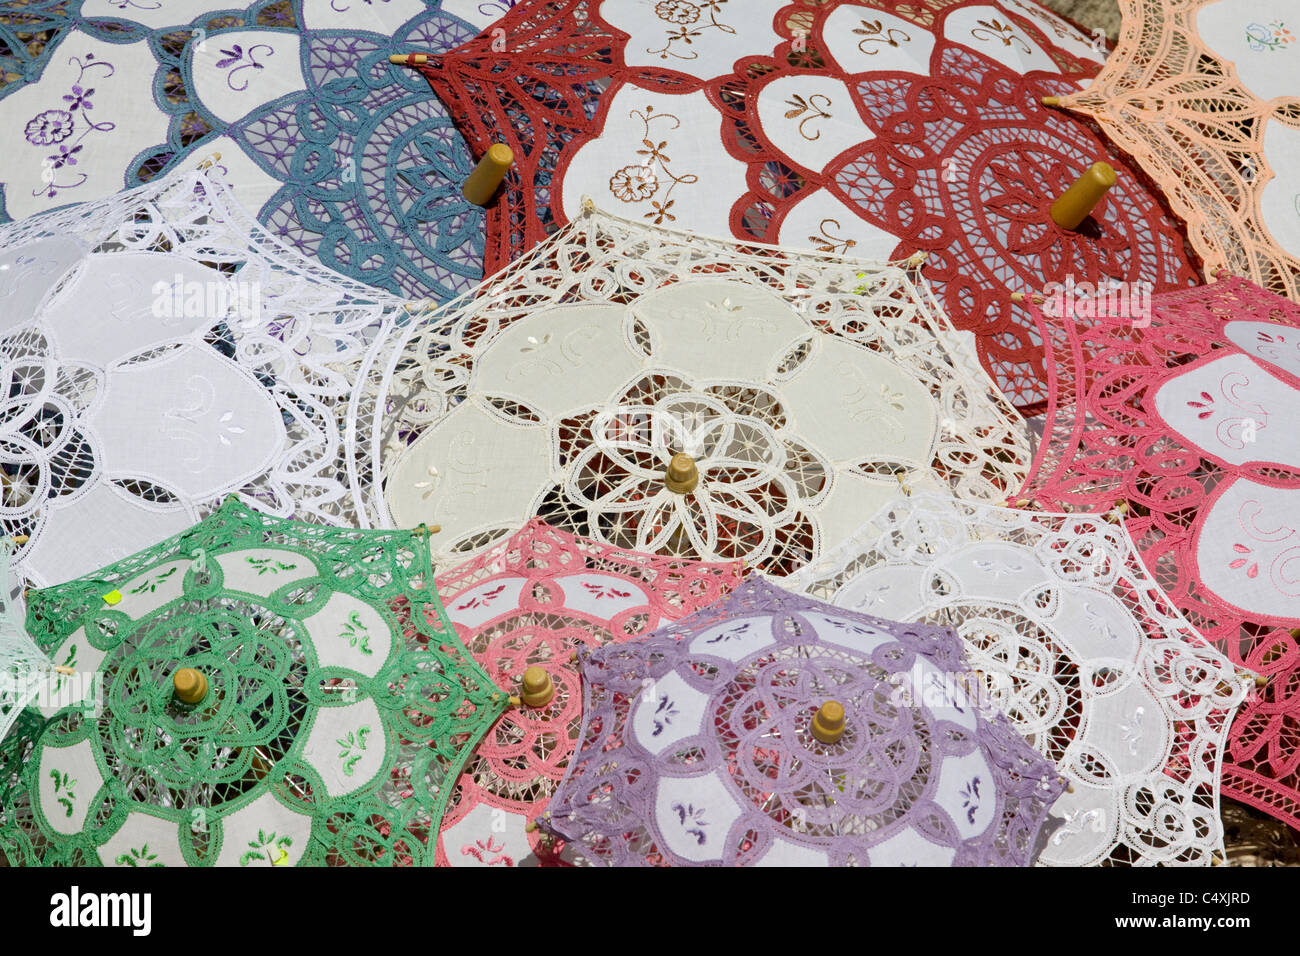 Authentic lace work from the ancient Village of Omodos in the Troodos Mountains, Cyprus Stock Photo